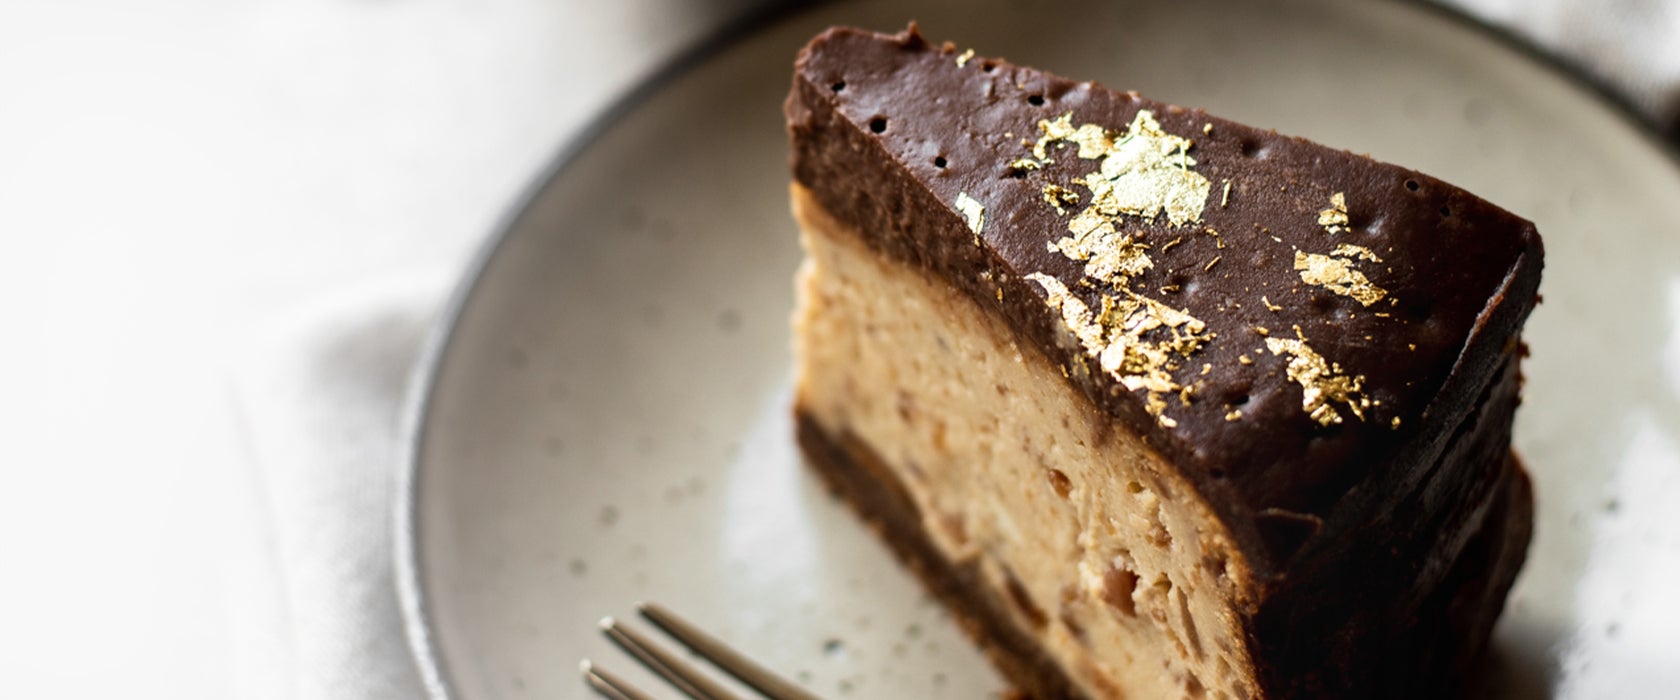 Peanut Butter Baked Cheesecake